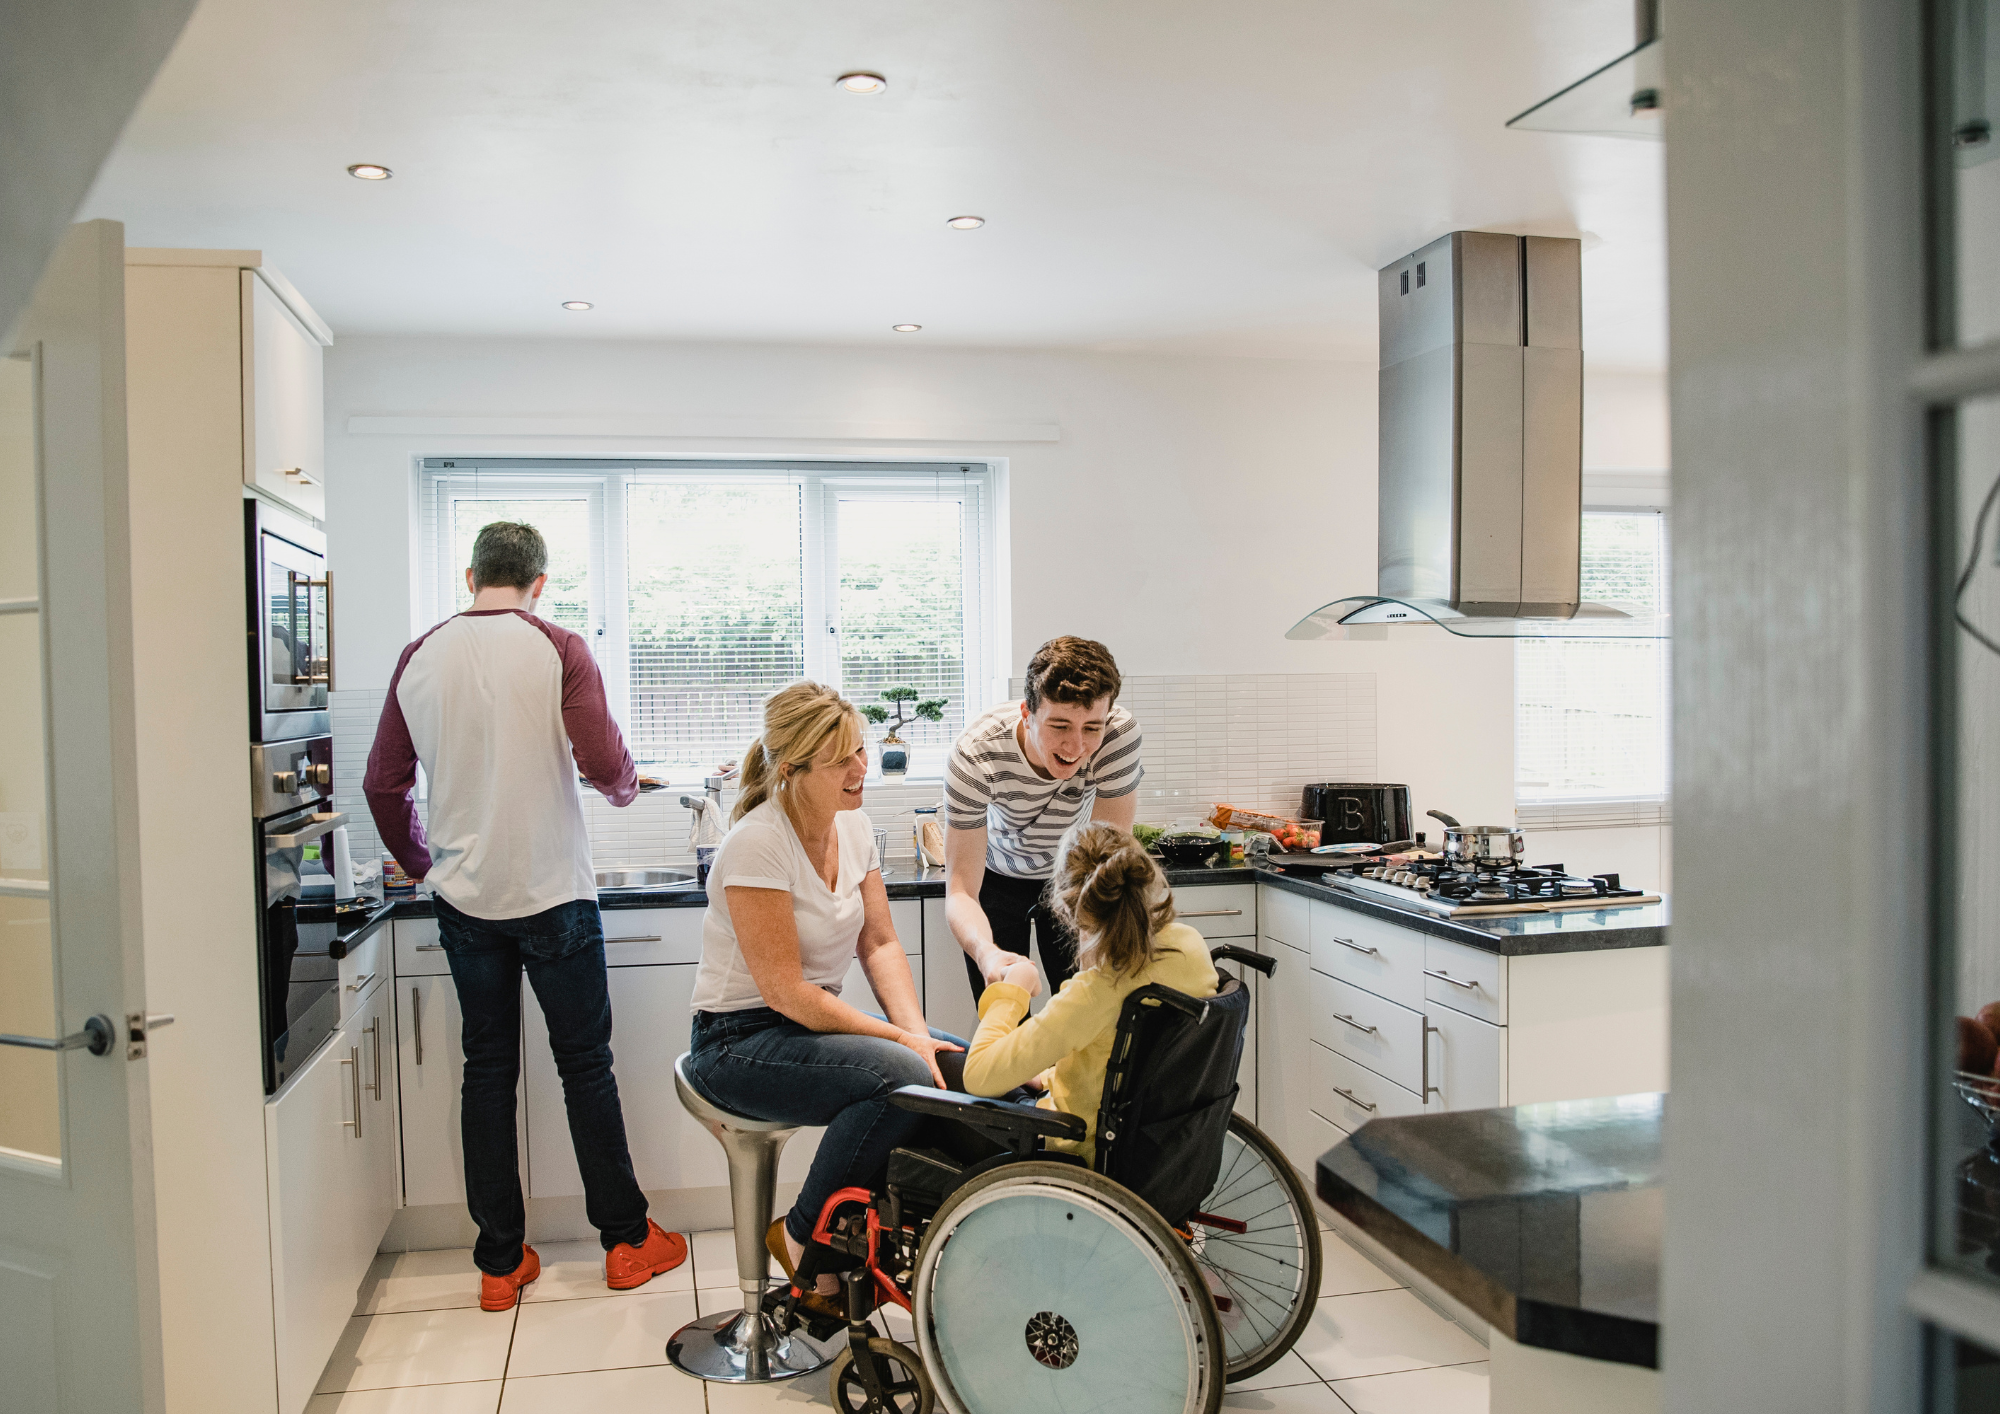 A man, woman, boy and girl are in the kitchen. The girl is in a wheelchair, the woman and boy chat to her as the man washes up at the kitchen sink.